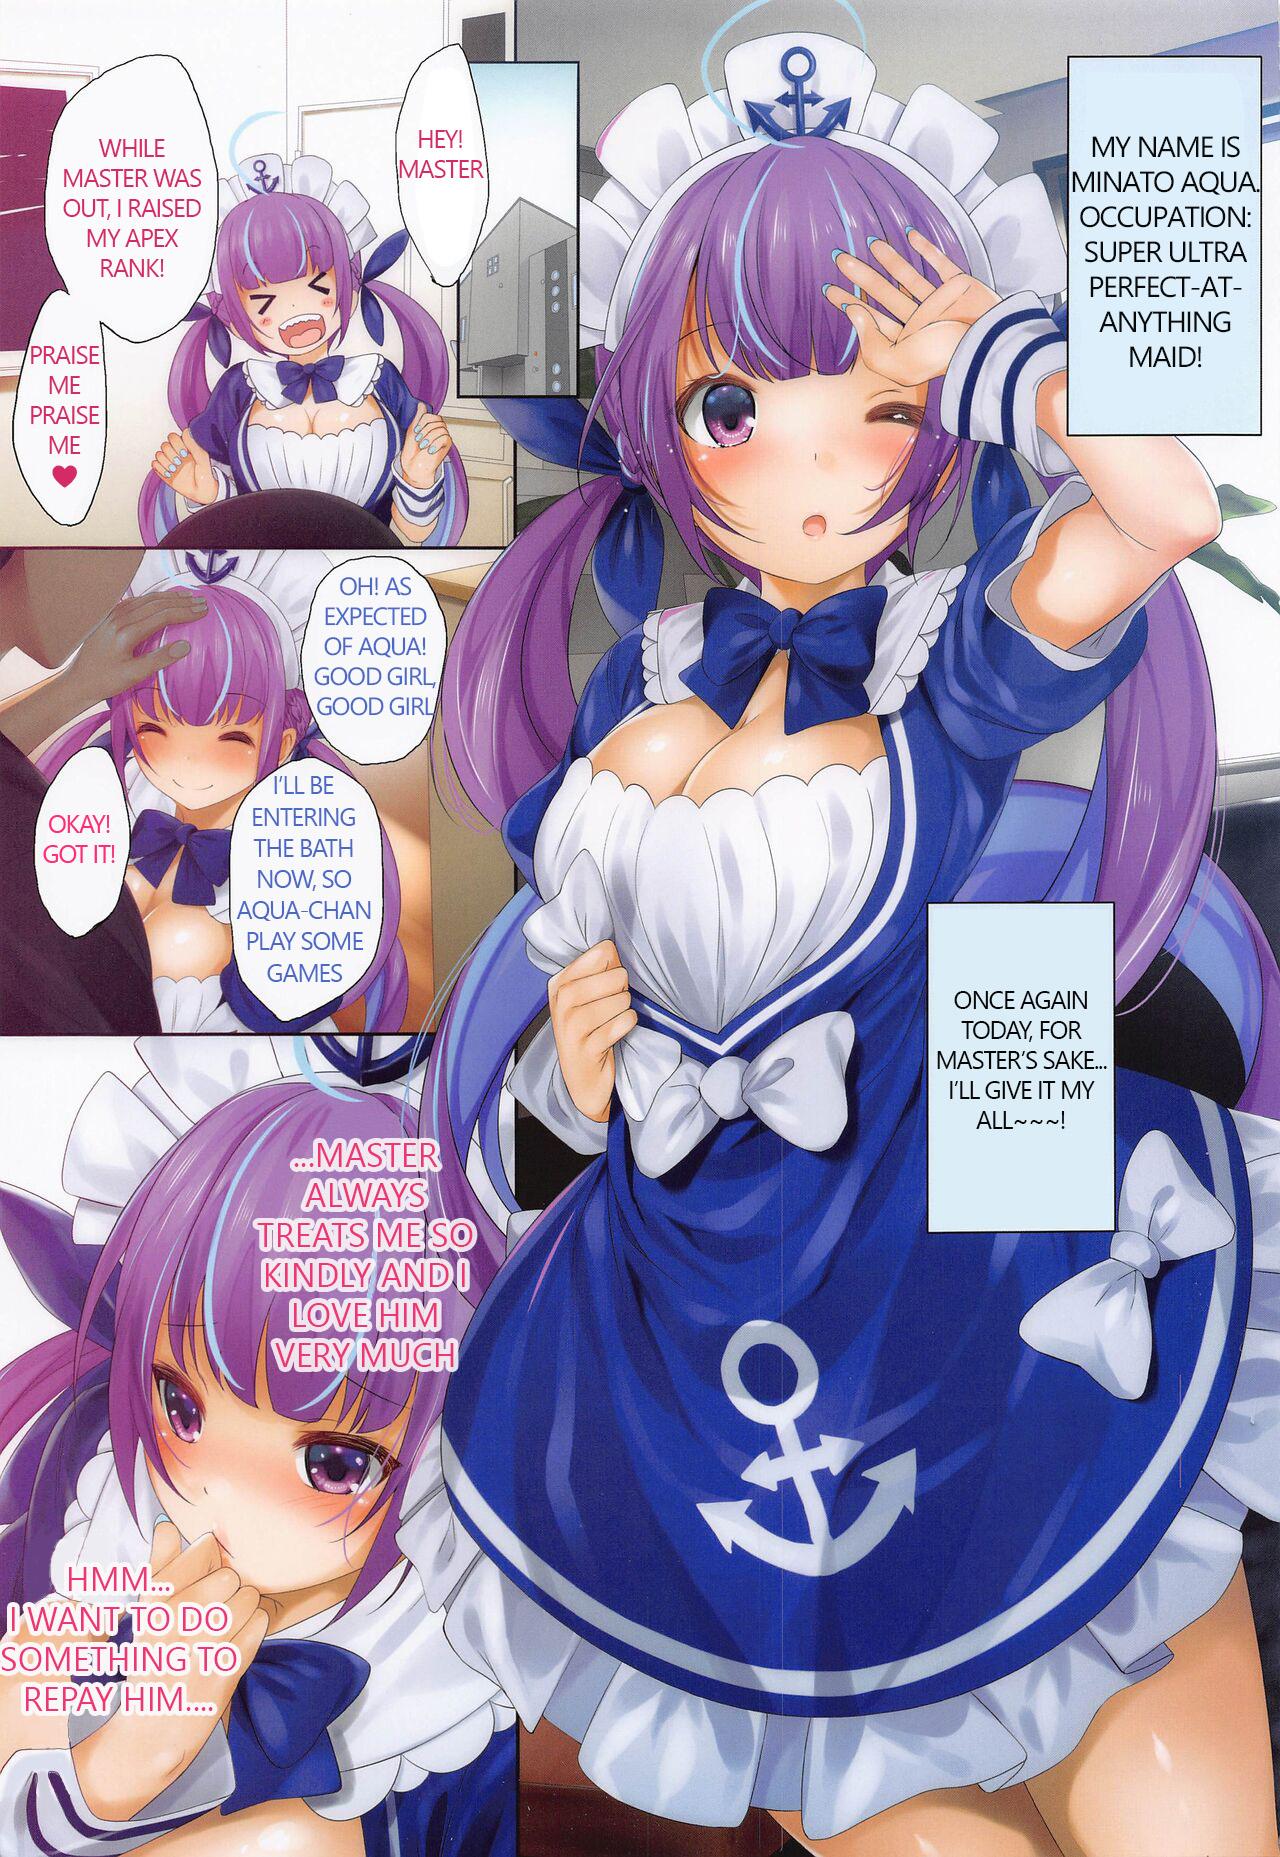 Sapphicerotica A・Q・U・A for the LOVE - Hololive Granny - Page 2